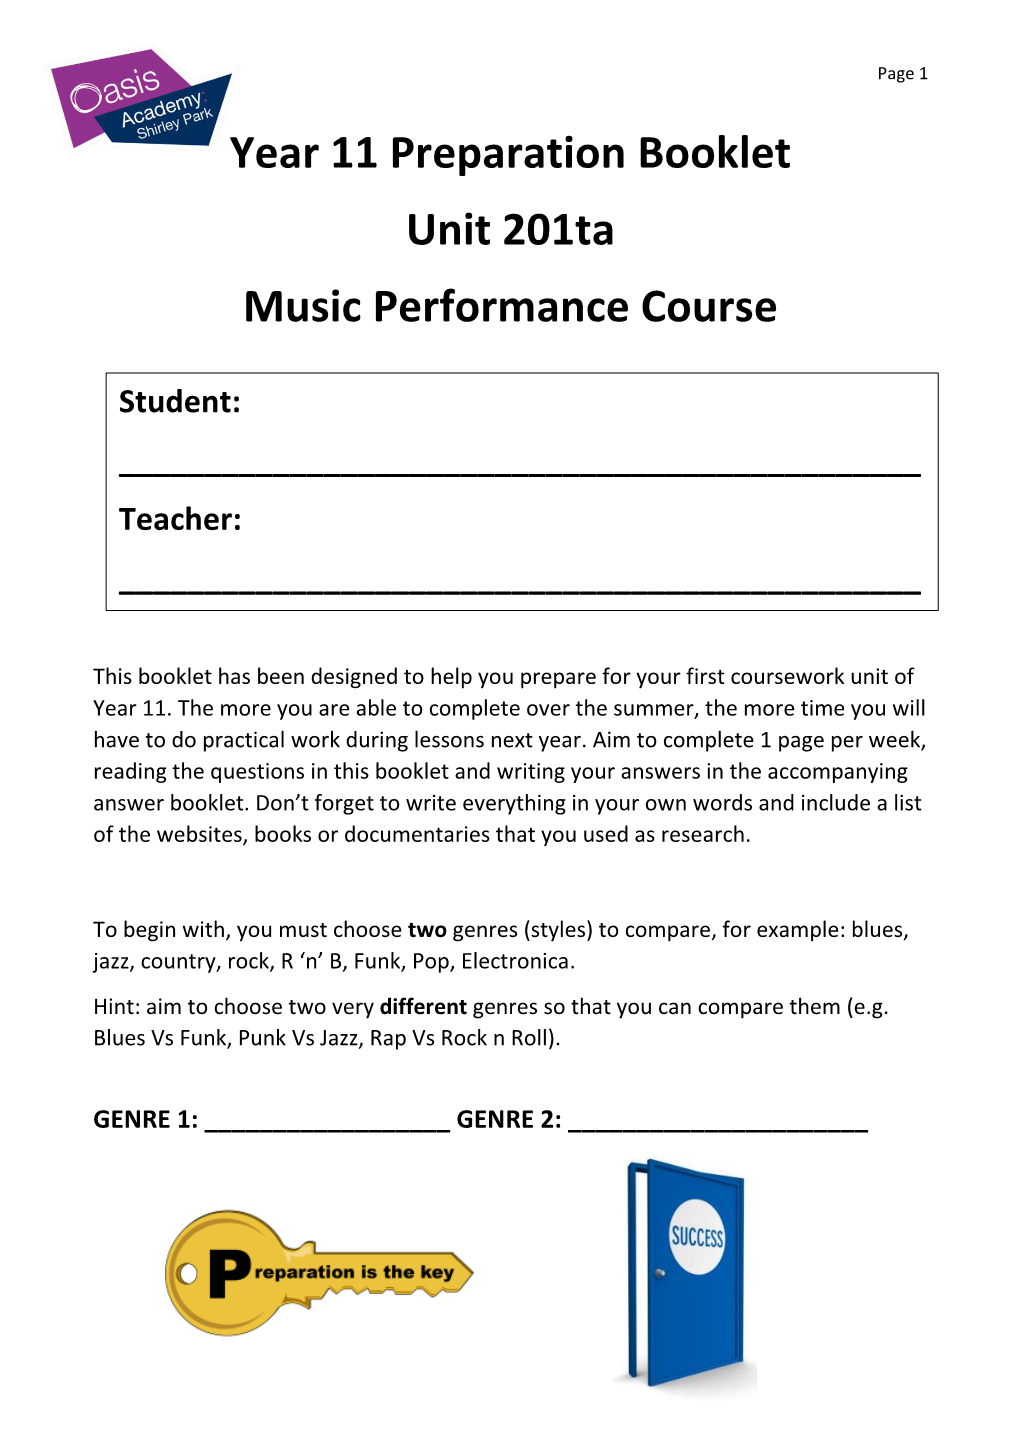 Year 11 Preparation Booklet Unit 201Ta Music Performance Course